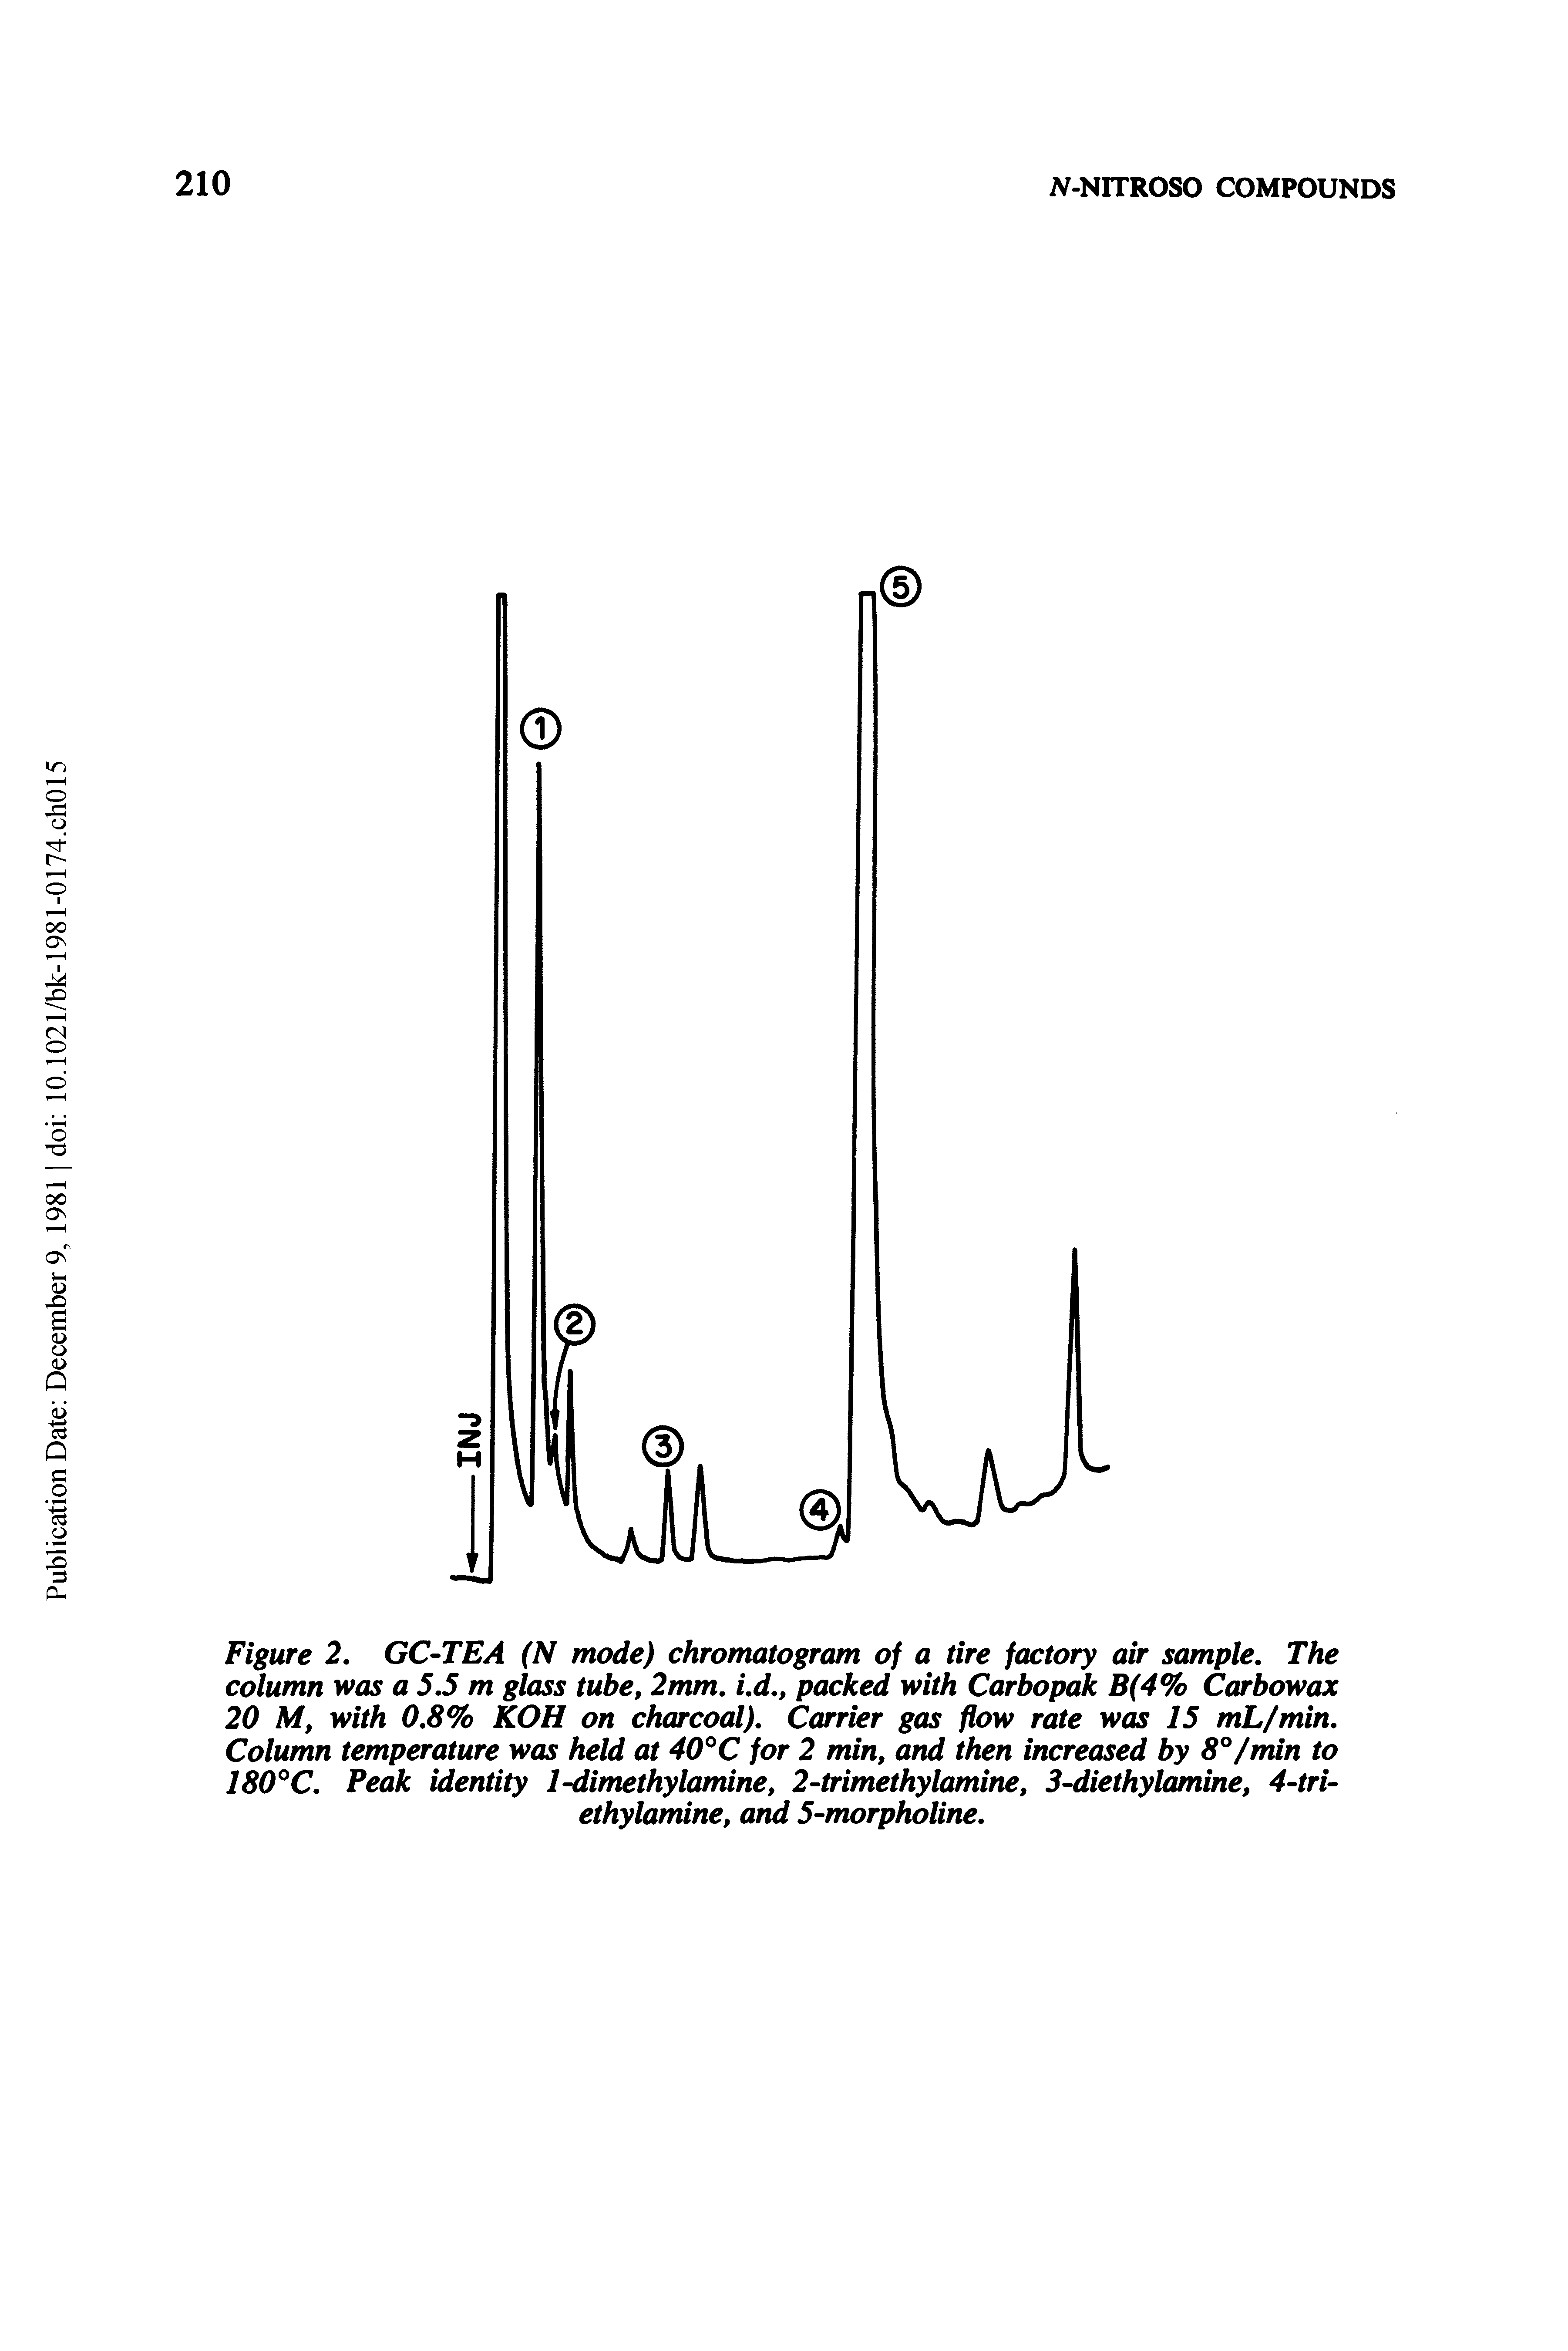 Figure 2, GC-TEA (N mode) chromatogram of a tire factory air sample. The column was a 5,5 m glass tube, 2mm, i,d, packed with Carbopak B(4% Carbowax 20 M, with 0,8% KOH on charcoal). Carrier gas flow rate was 15 mL/min, Column temperature was held at 40°C for 2 min, and then increased by 8°/min to 180°C, Peak identity 1-dimethylamine, 2-trimethylamine, 3-diethylamine, 4-tri-ethylamine, and 5-morpholine,...